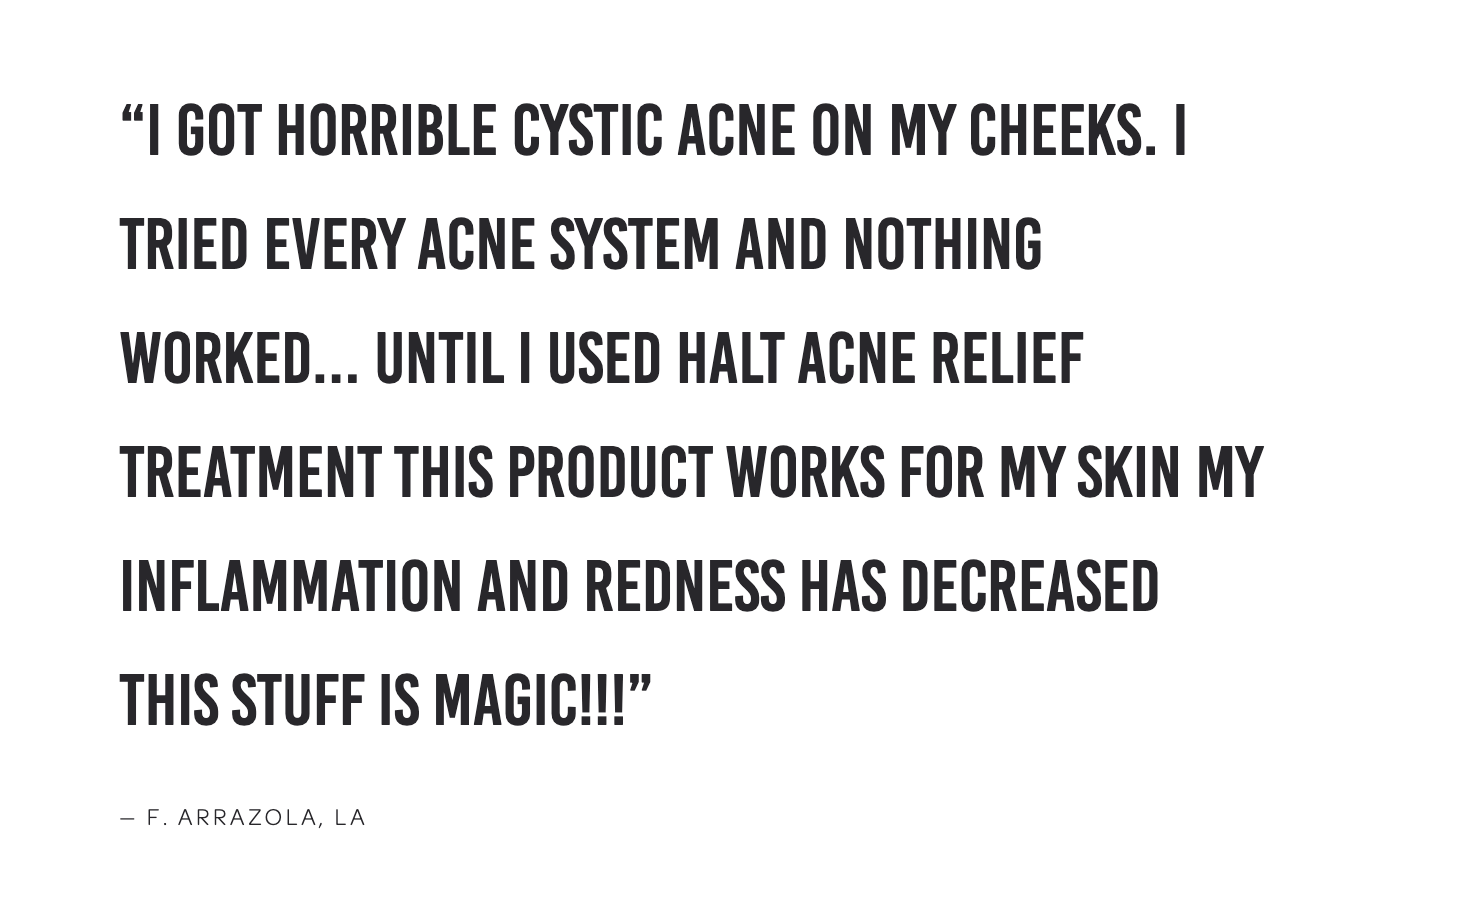 Testimonial for acne relief treatment for inflammation and redness